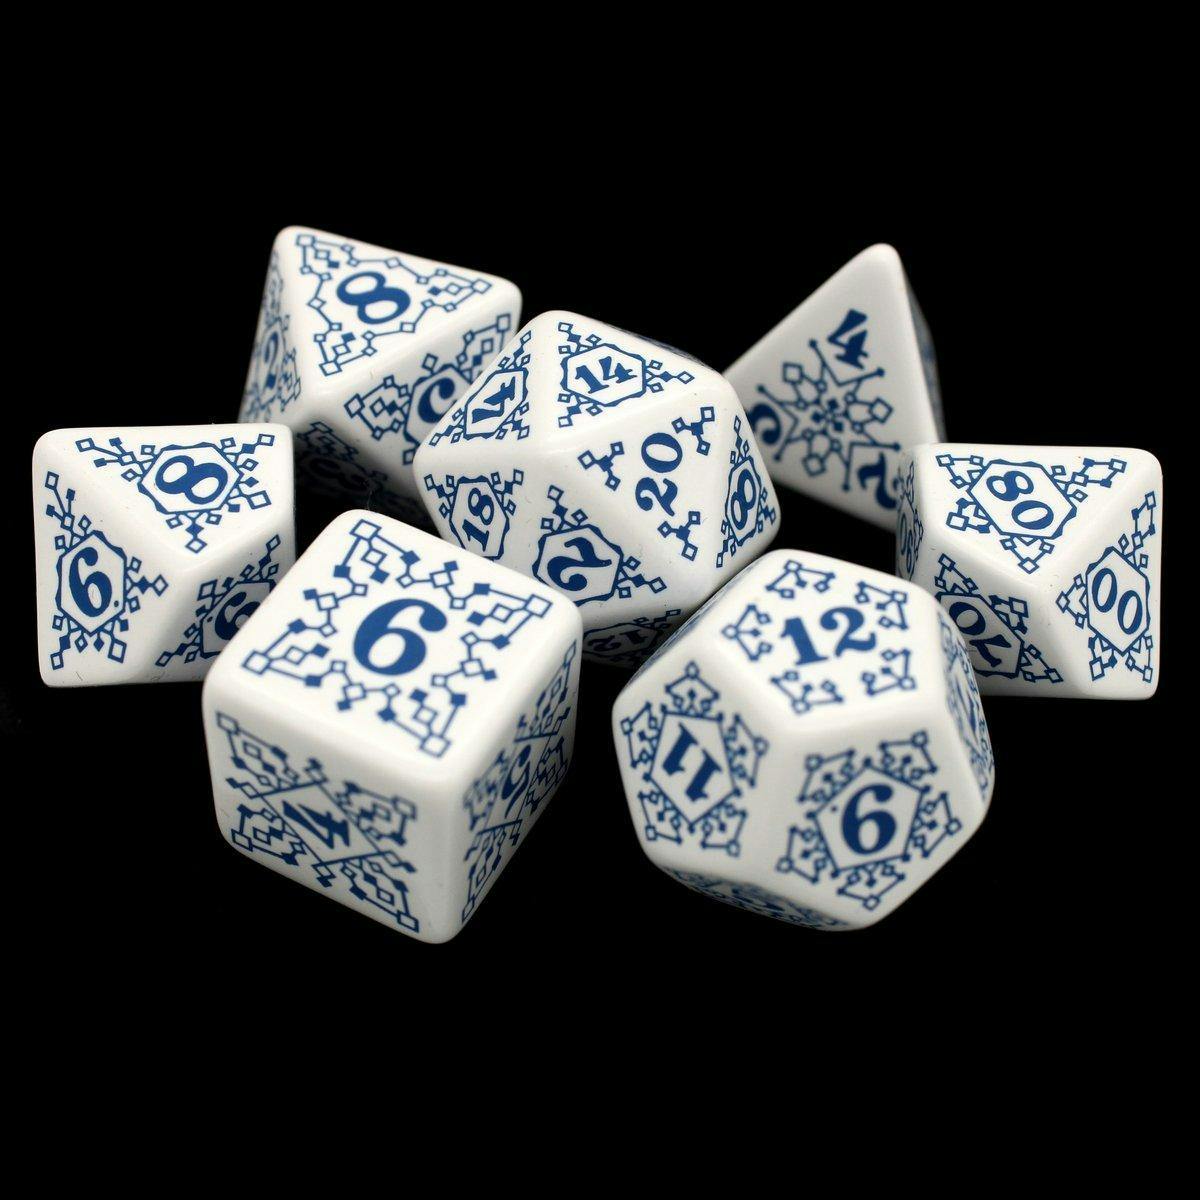 DICE ENVY: Frost Dice